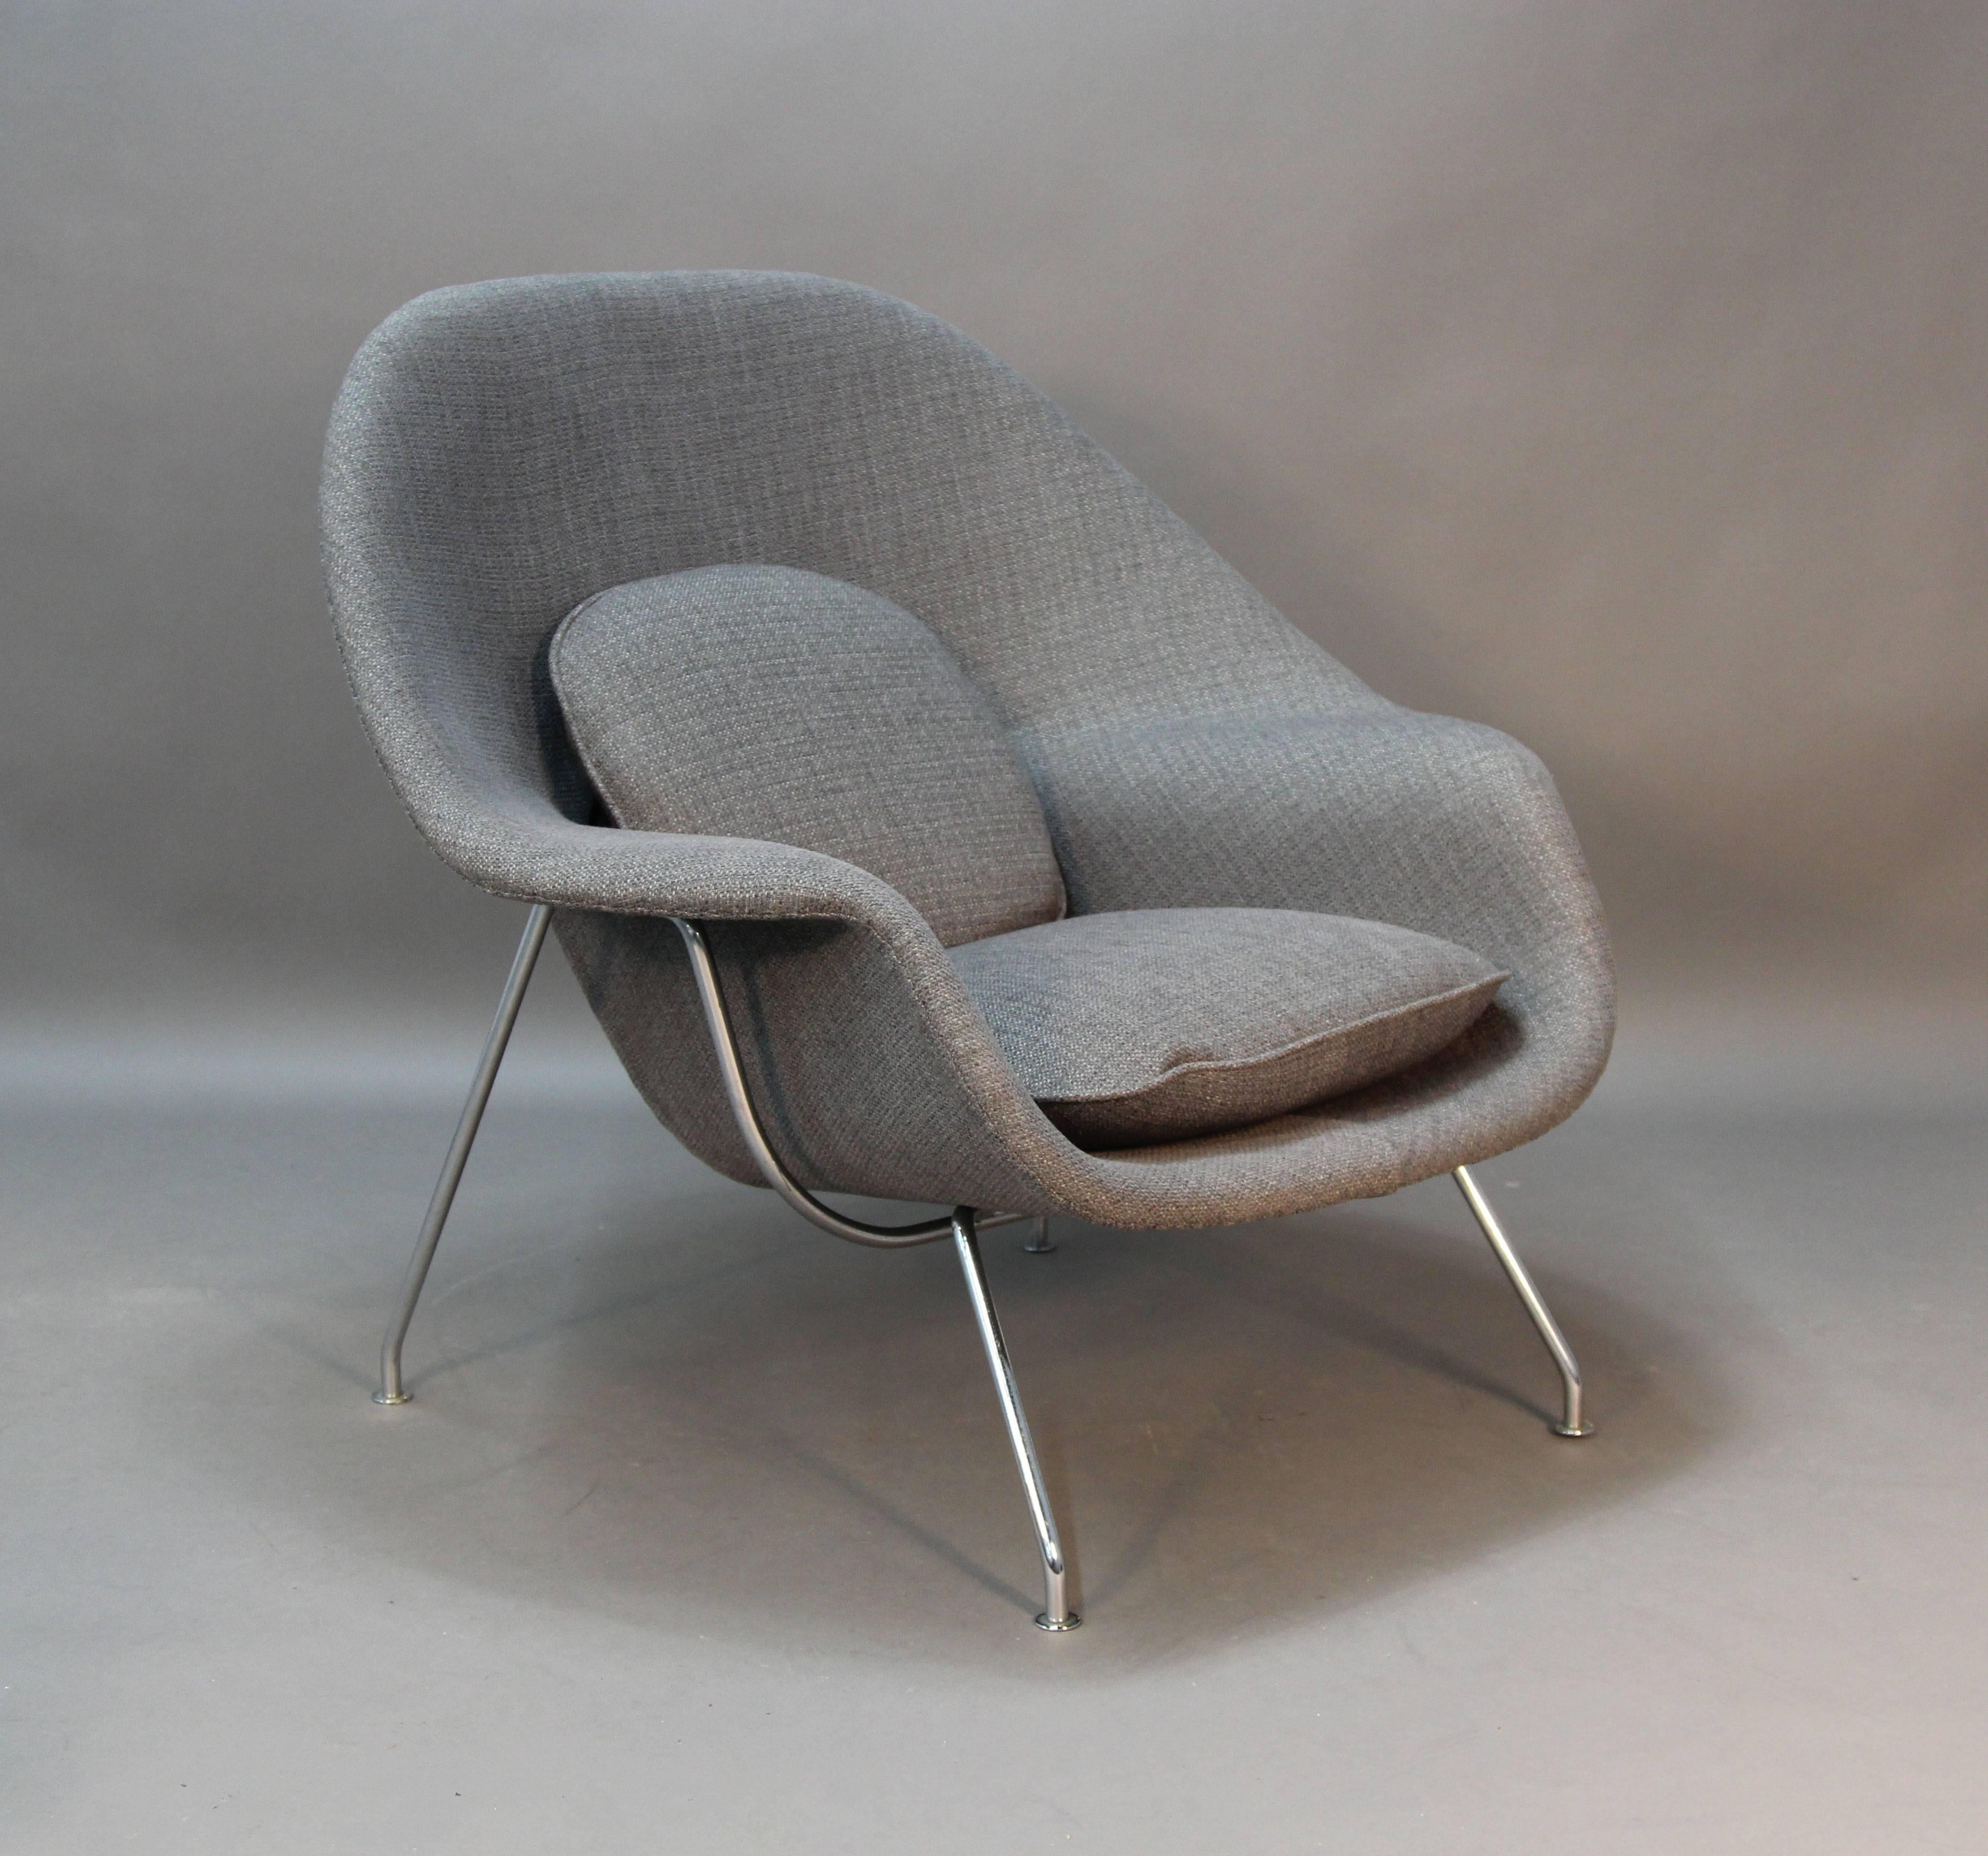 Upholstery Eero Saarinen for Knoll Womb Chair and Ottoman Newly Upholstered